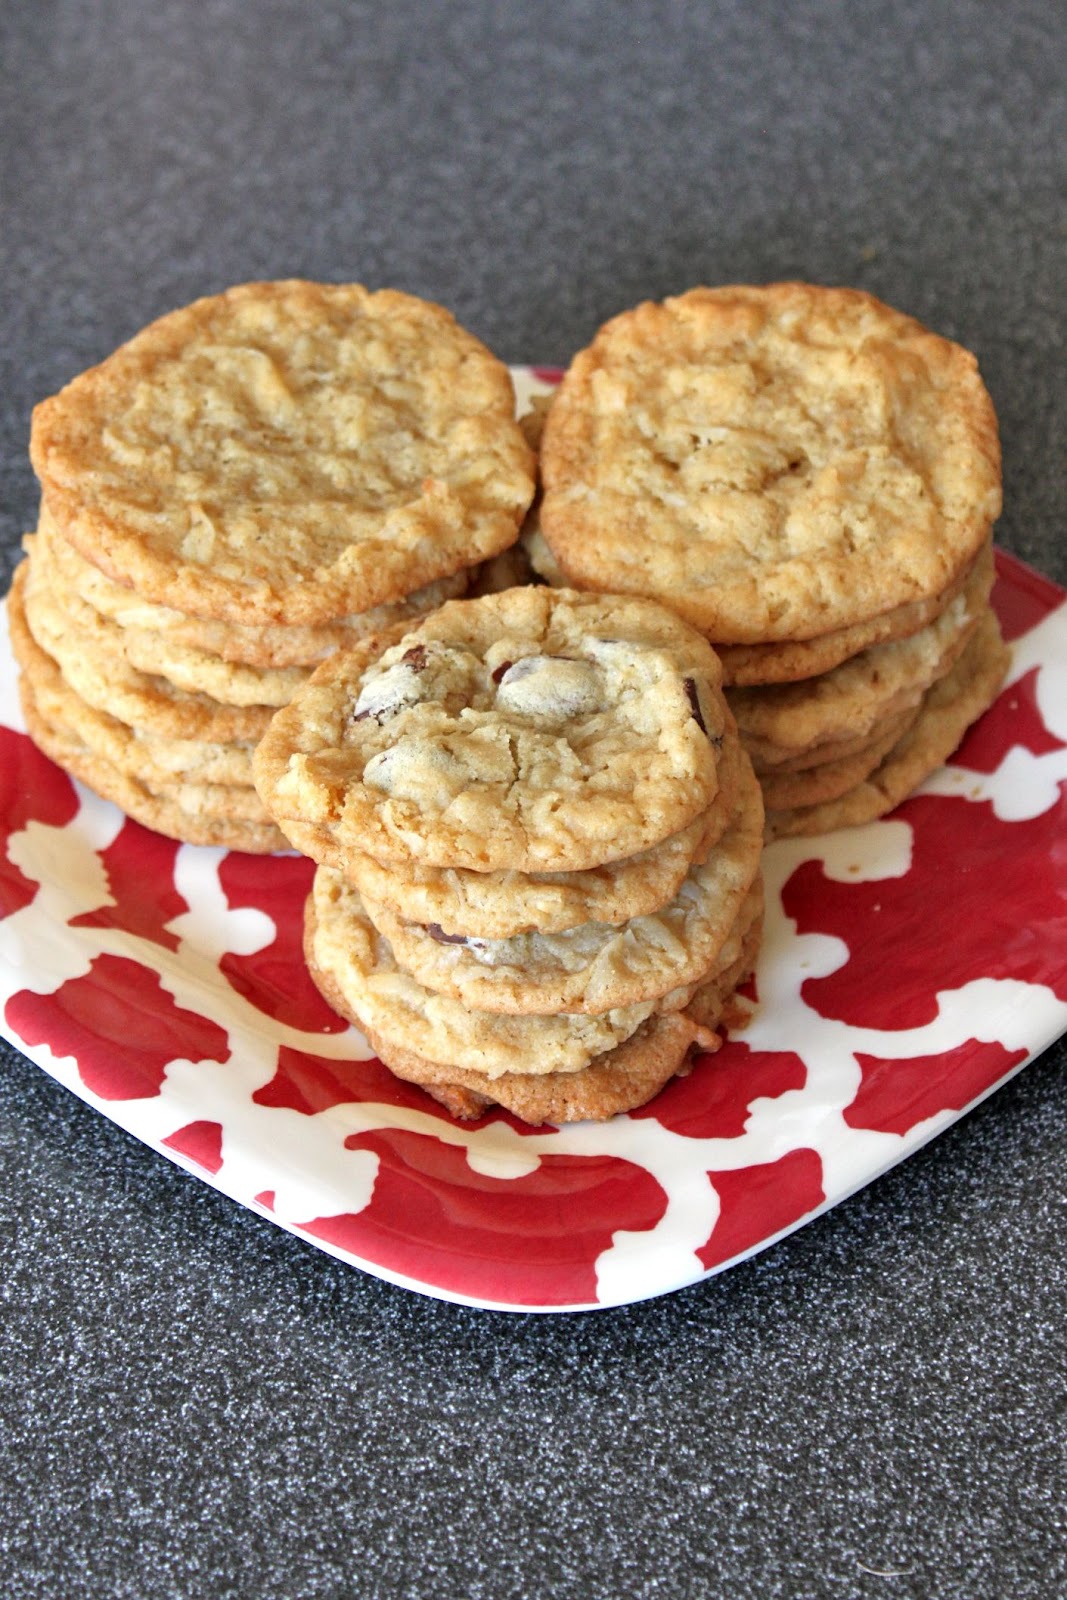 Baked Perfection: Chewy Coconut Chocolate Chip Cookies